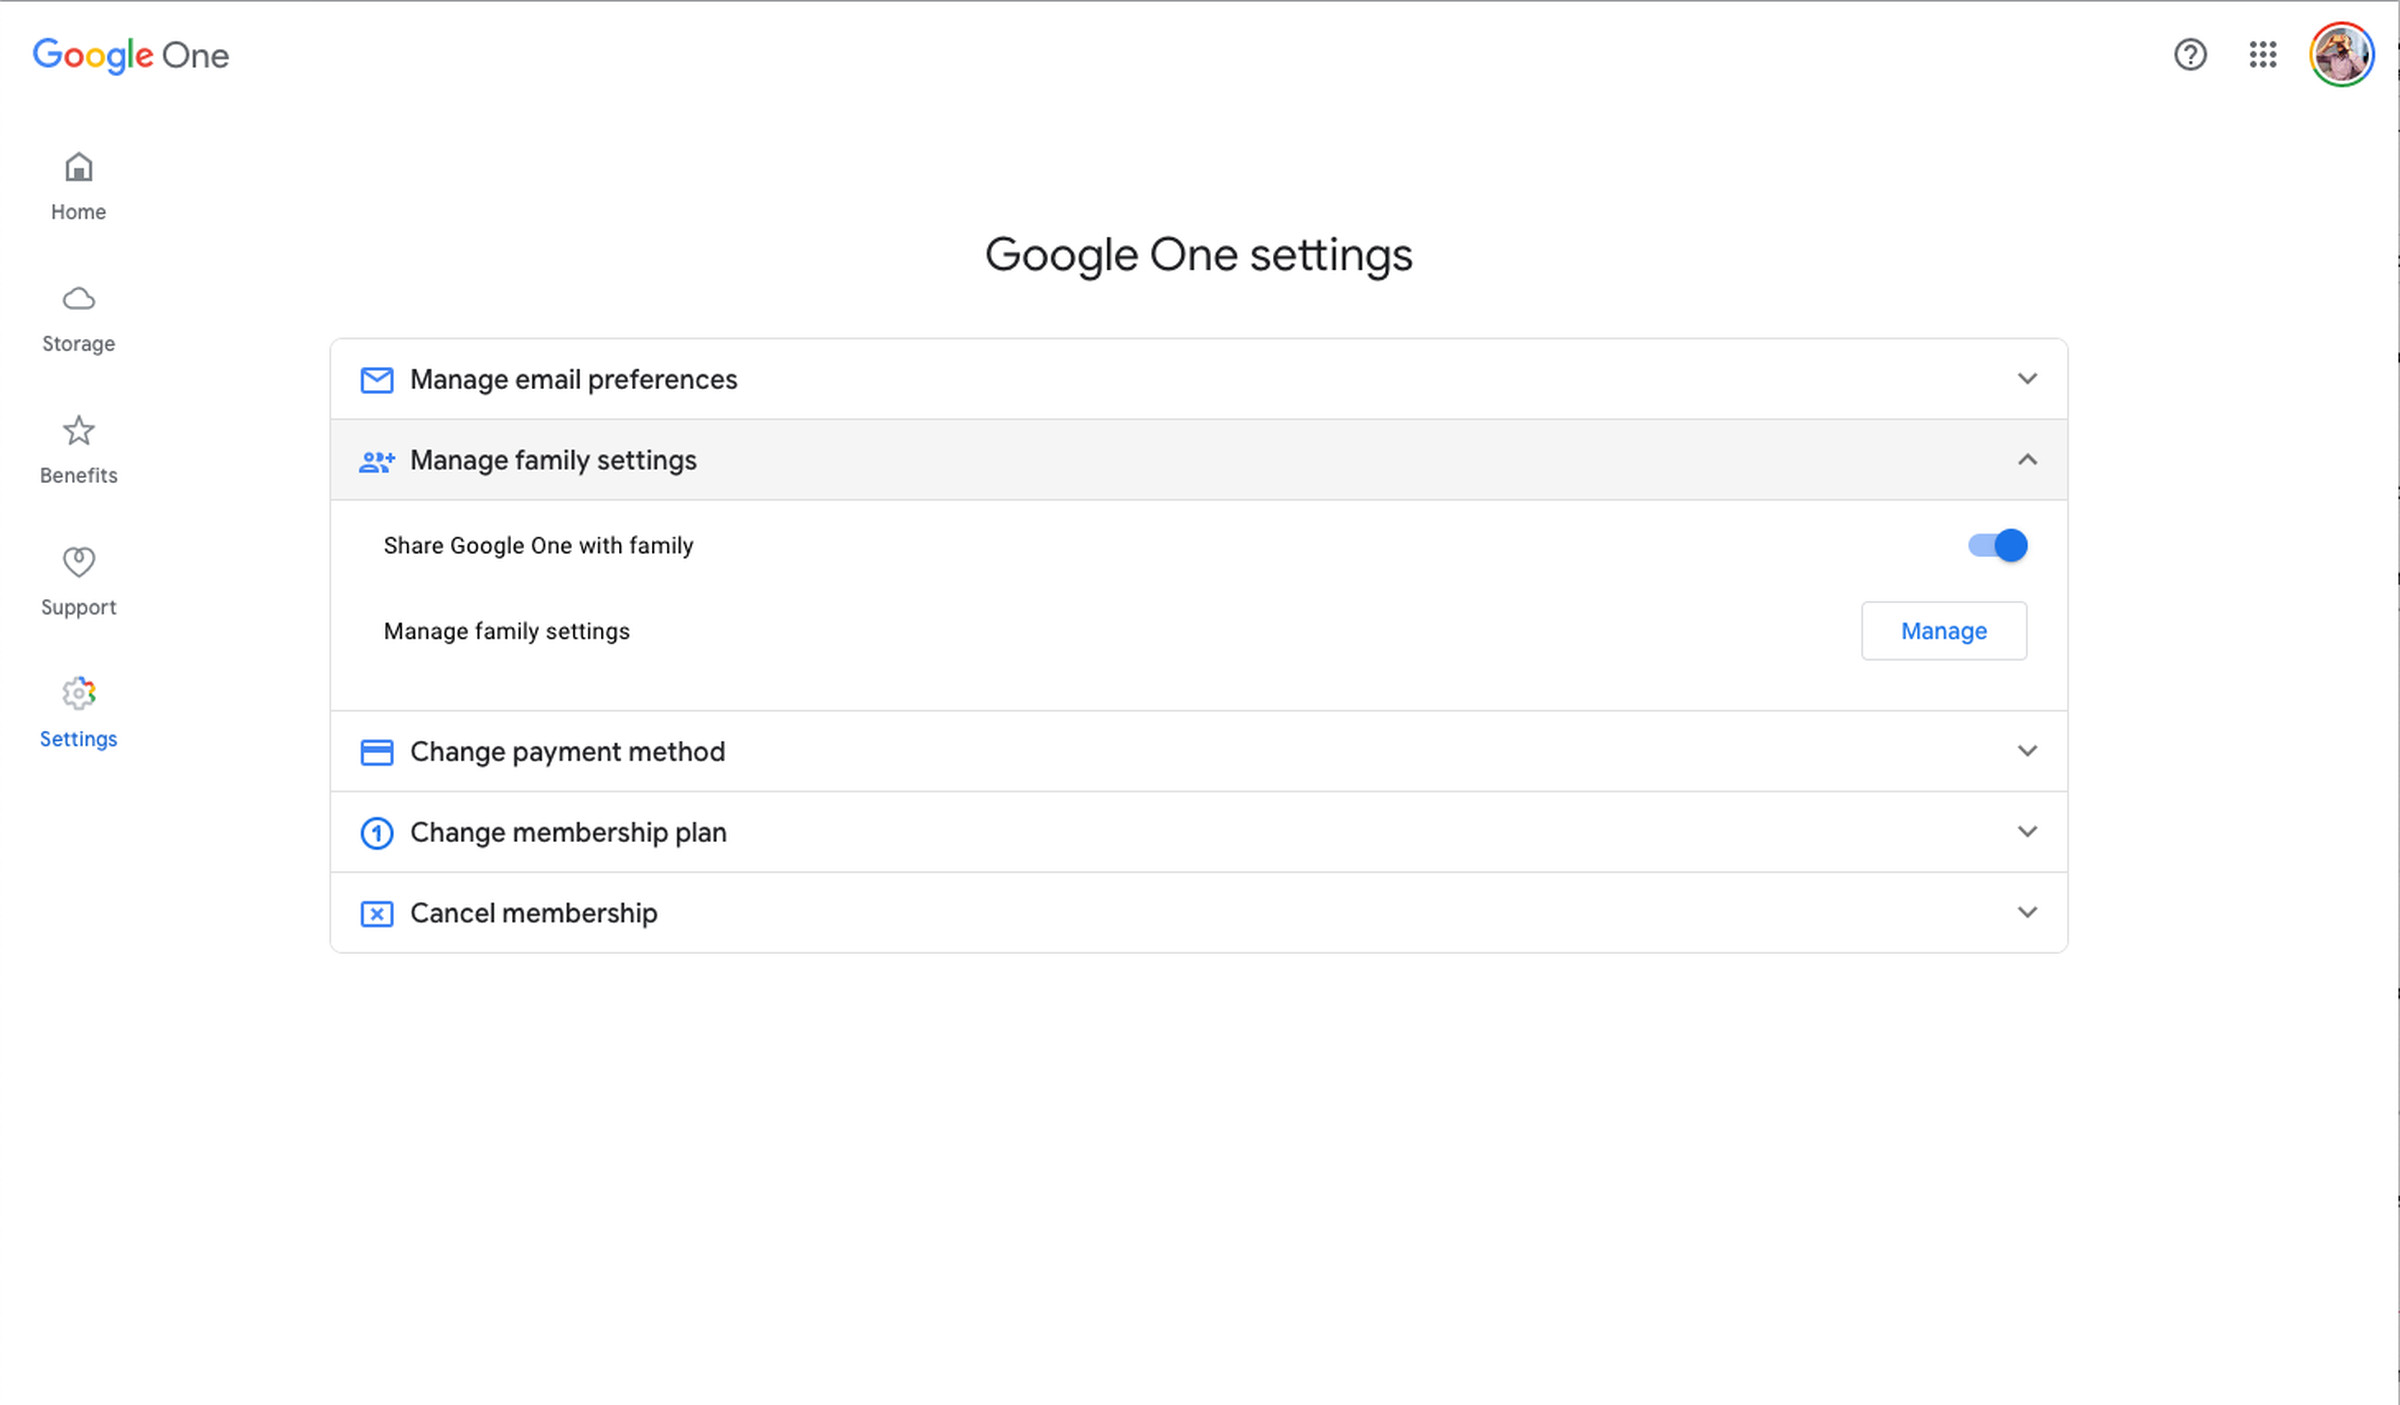 To enable shared storage, go to settings and look for “Share Google One with family.”